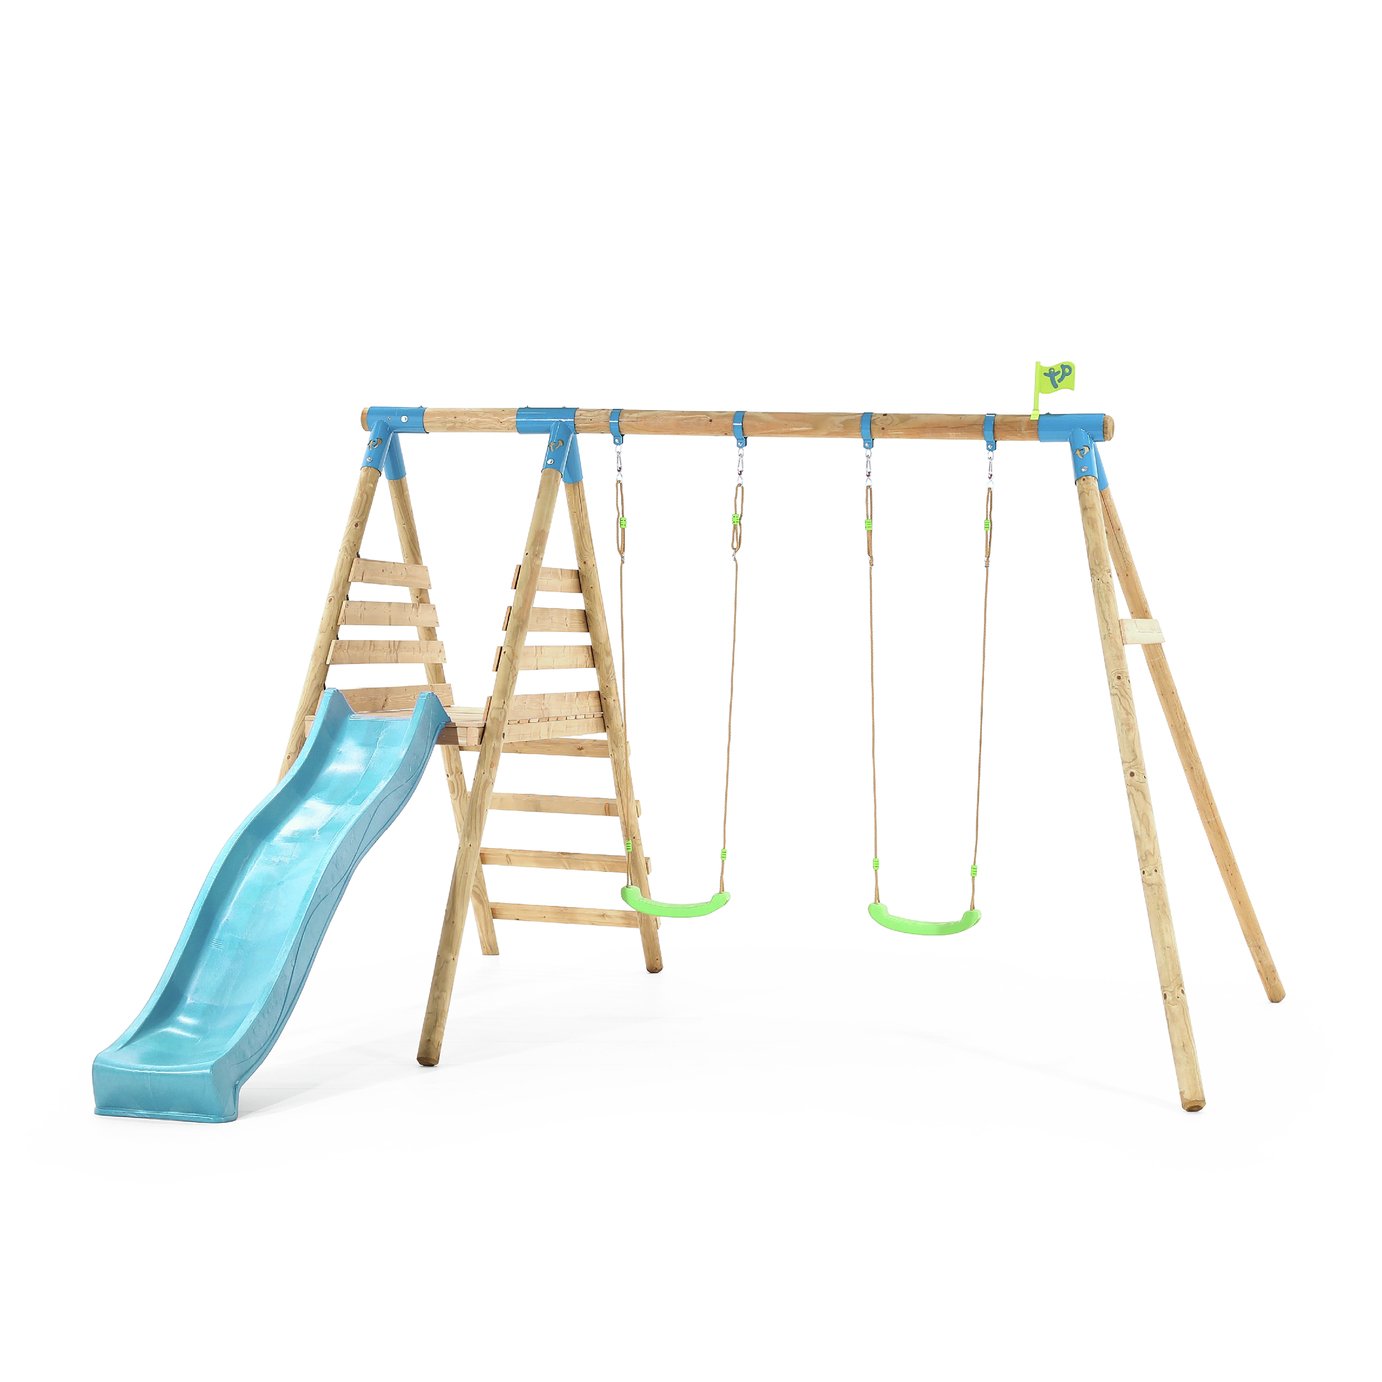 TP Breacon Wooden Swing and Slide review